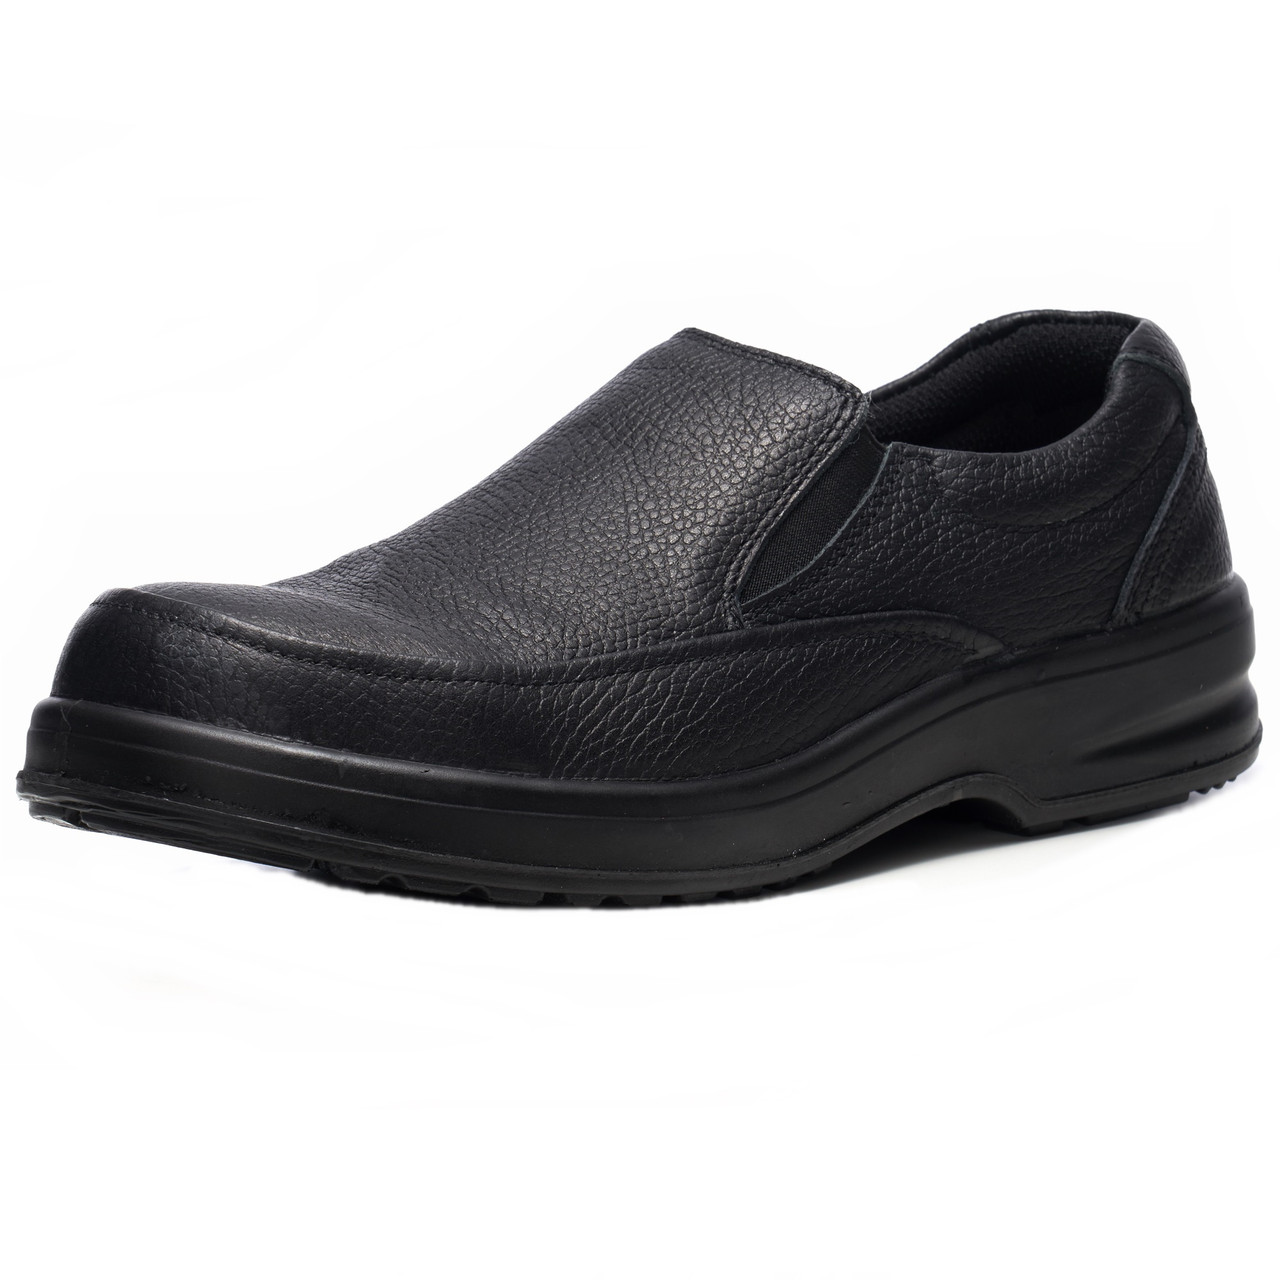 Buy Avi-Flame Slip Resistant Clogs Men's Footwear from Avia. Find Avia  fashion & more at DrJays.com